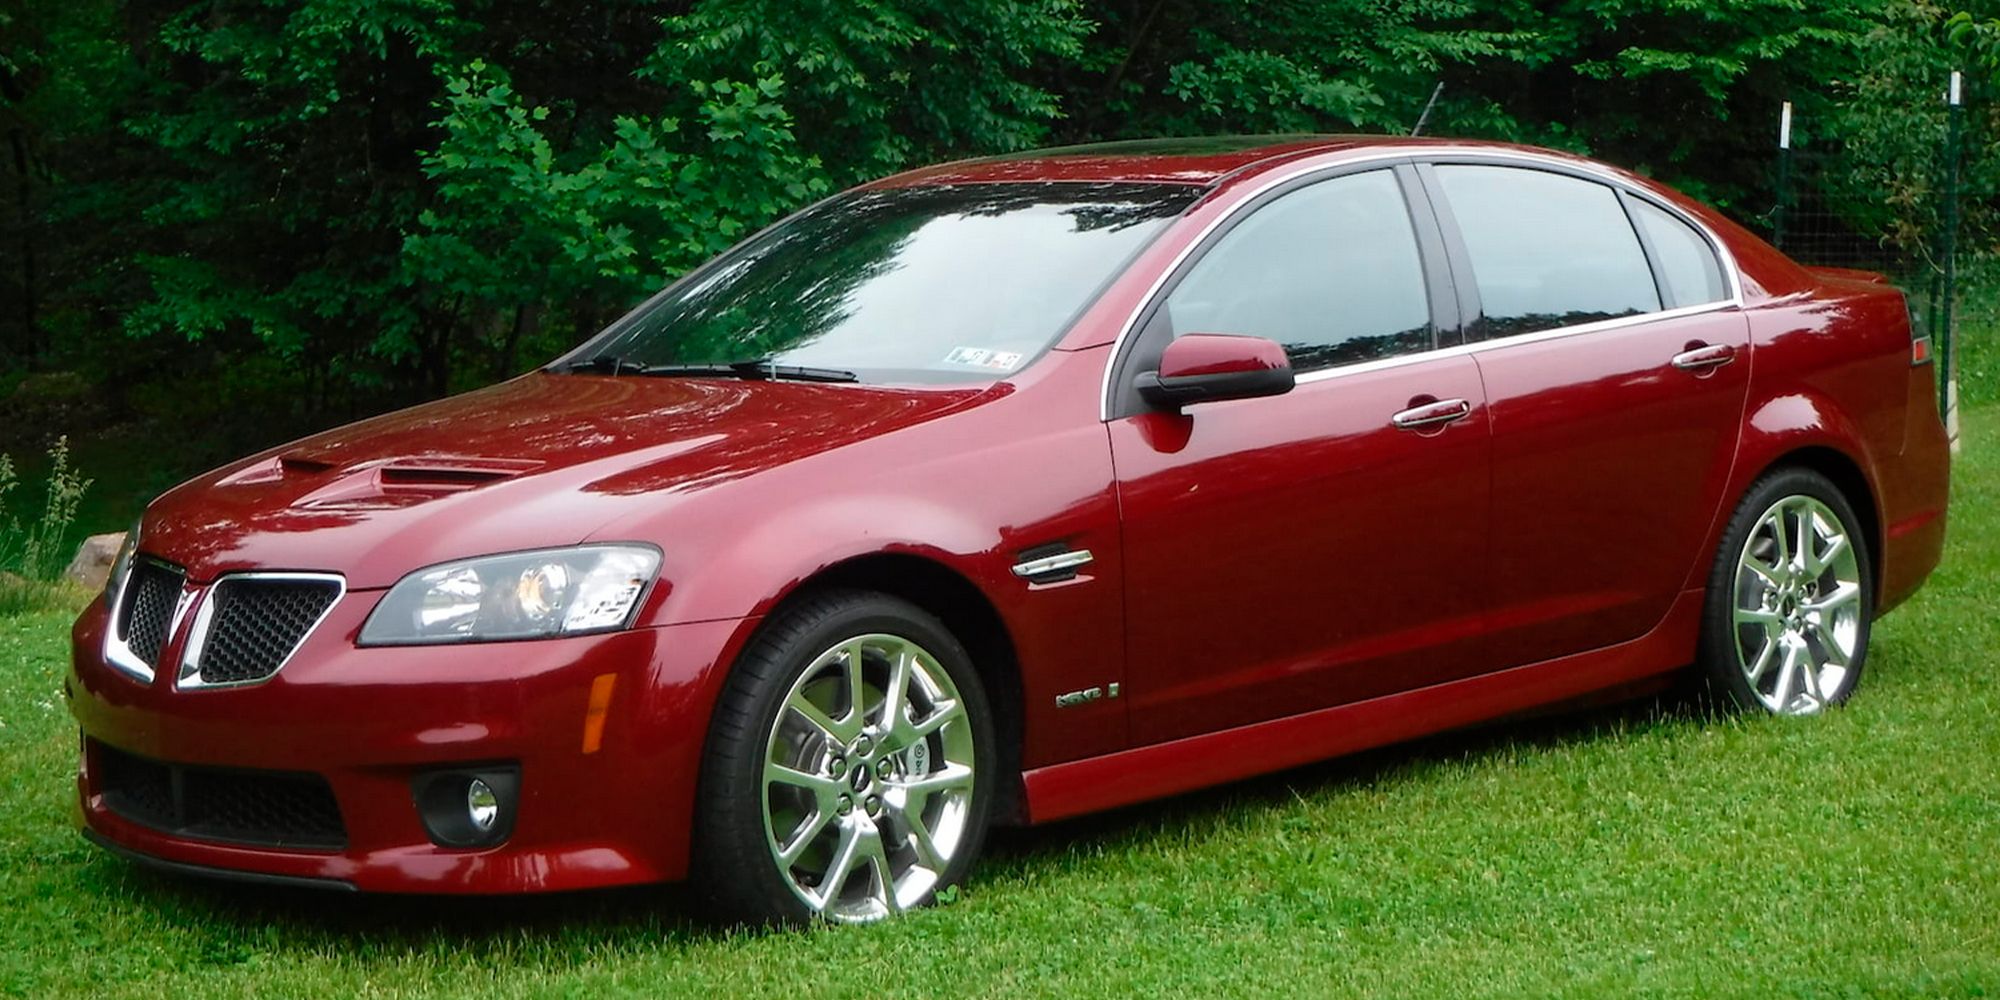 The Pontiac G8 in red